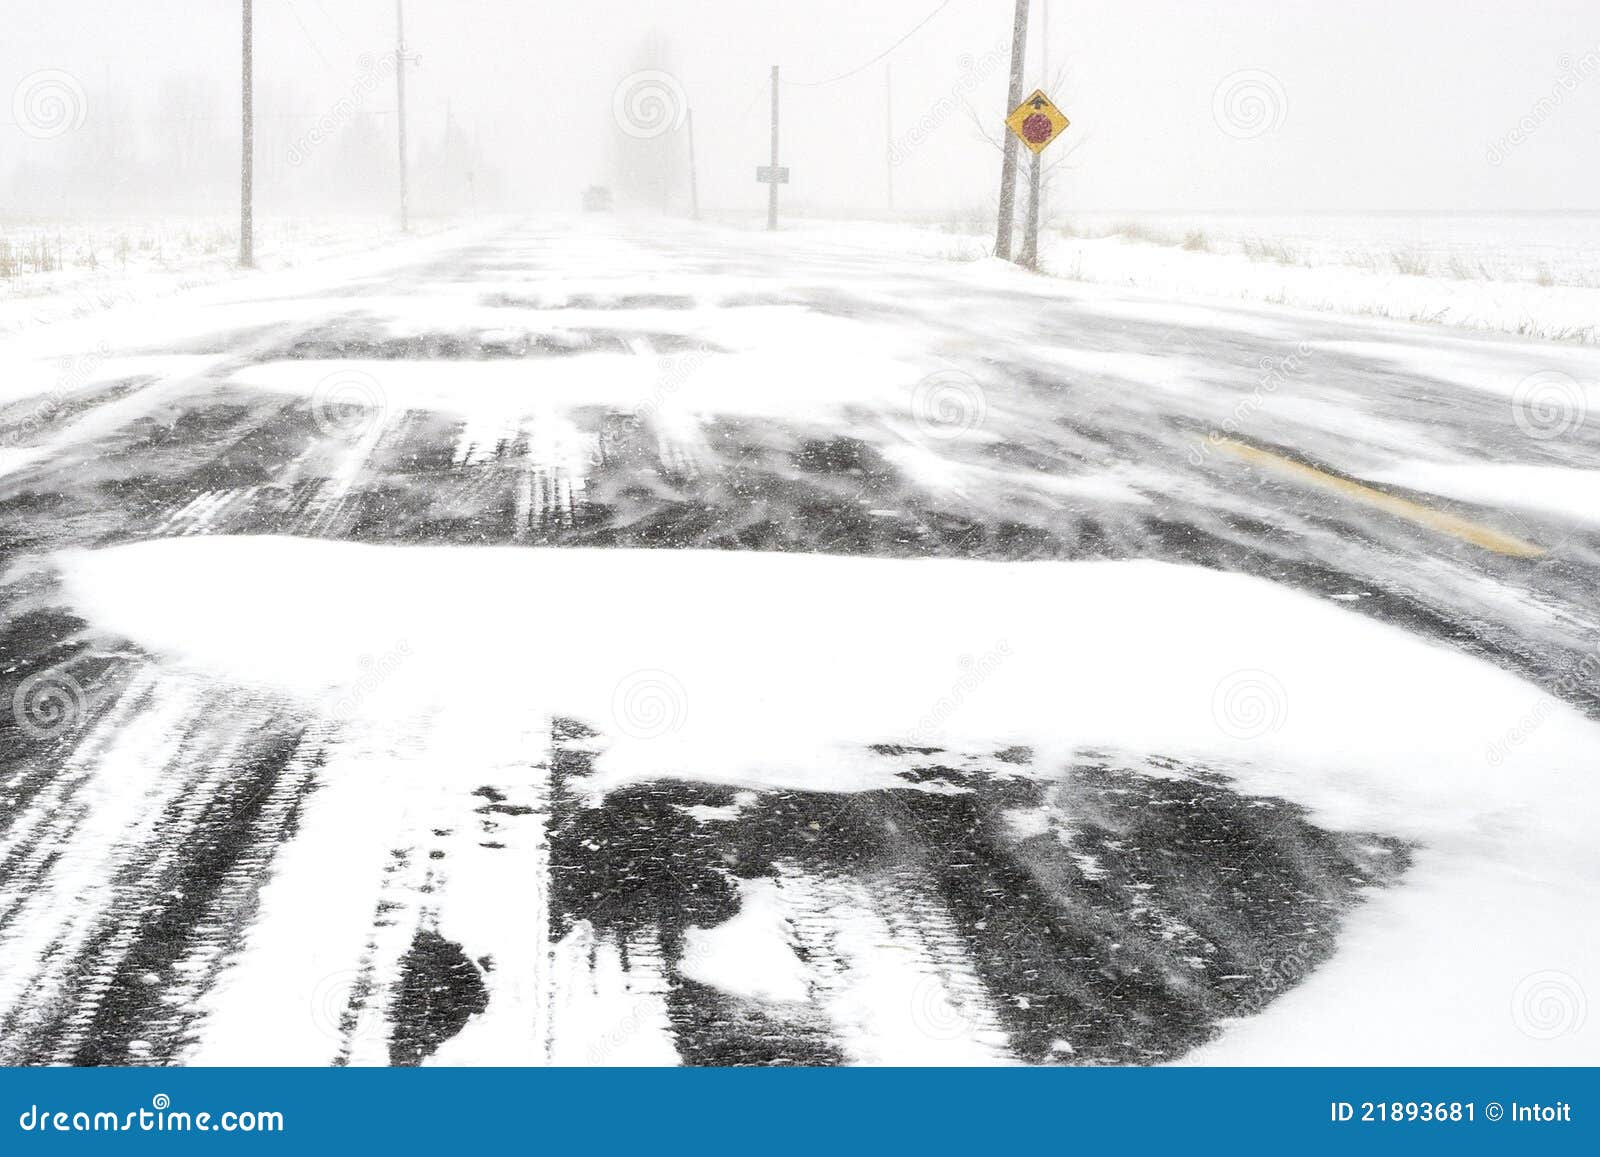 Horrible Winter Road Conditions Stock Image - Image of falling ...